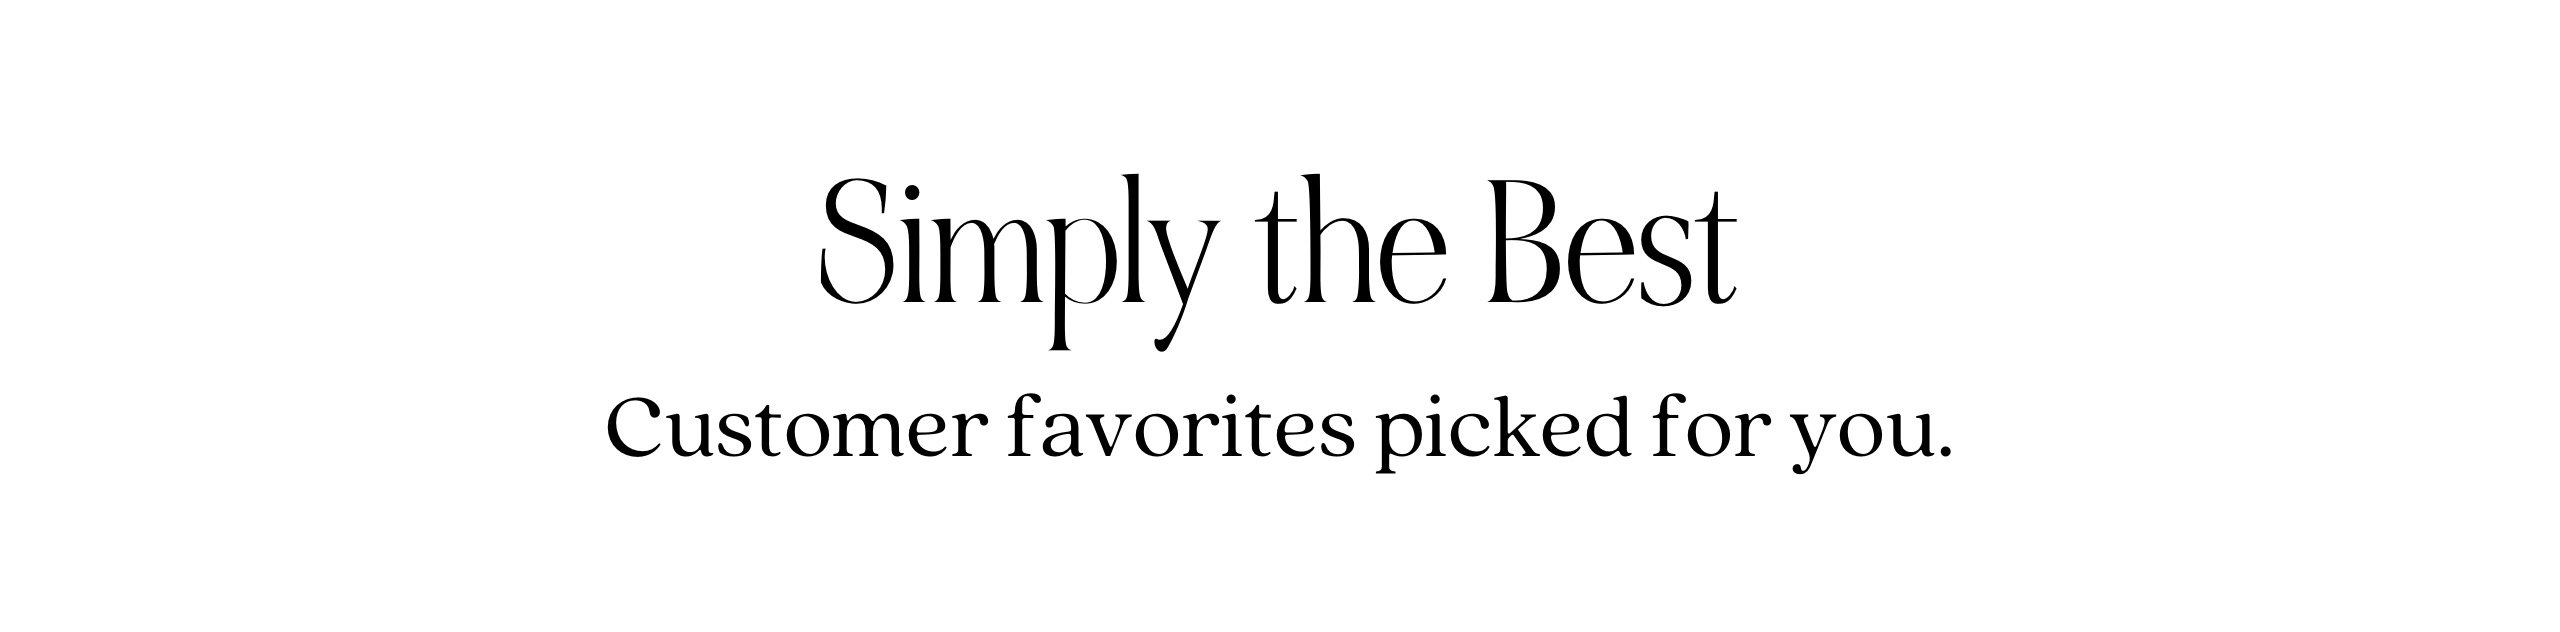 Simply the Best Customer favorites picked for you. 